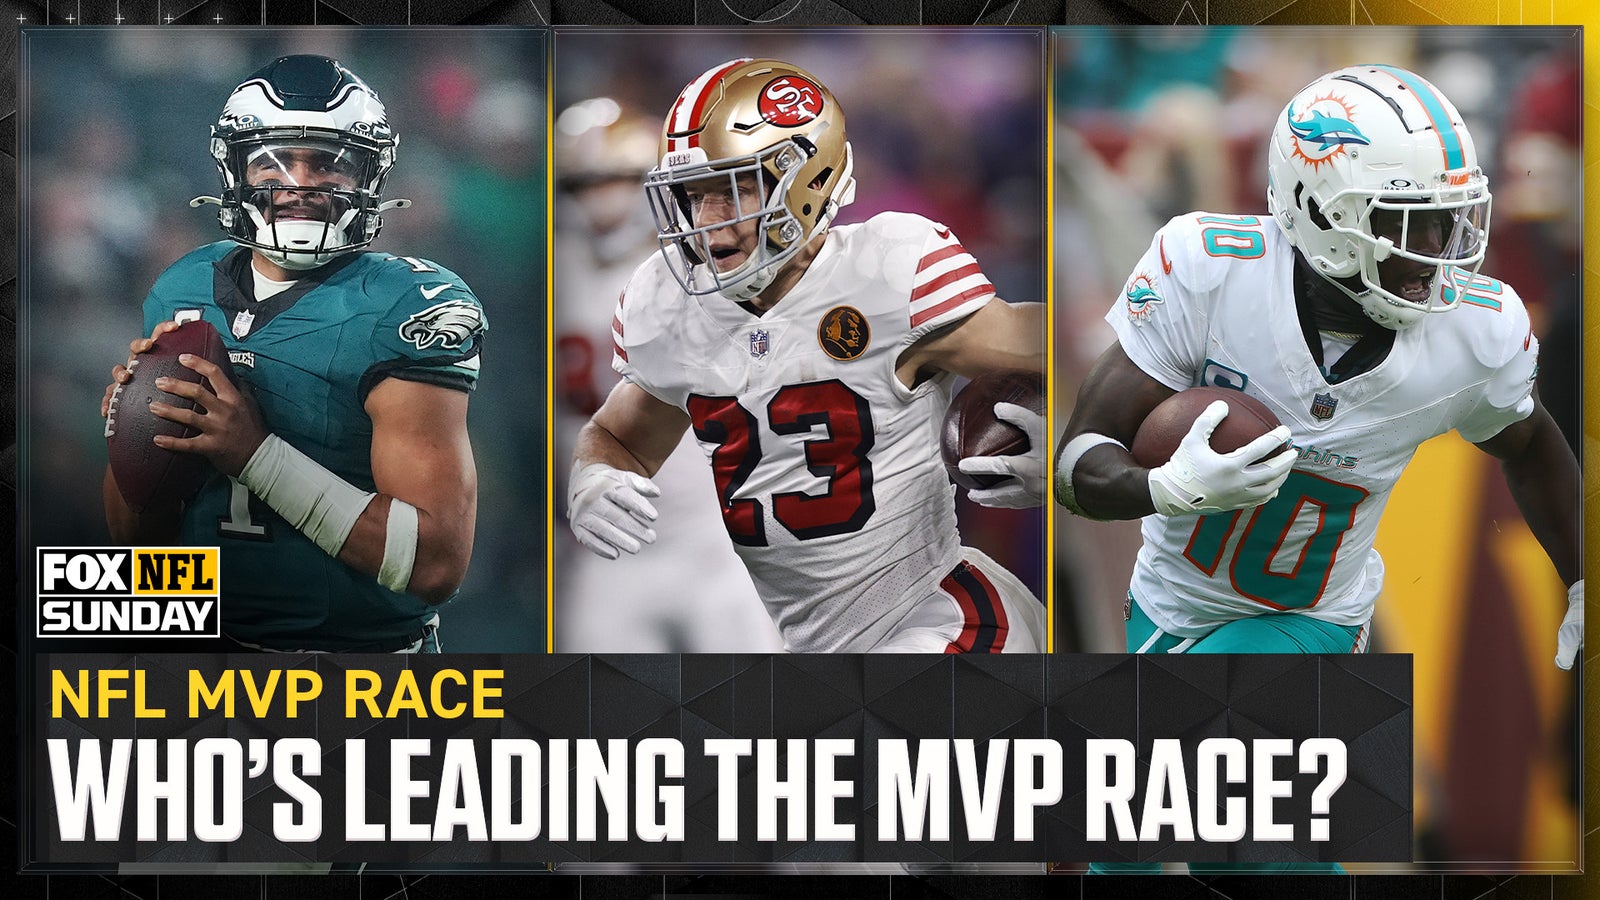 Can 49ers' Christian McCaffrey, Dolphins' Tyreek Hill, or Eagles' Jalen Hurts win NFL MVP? 